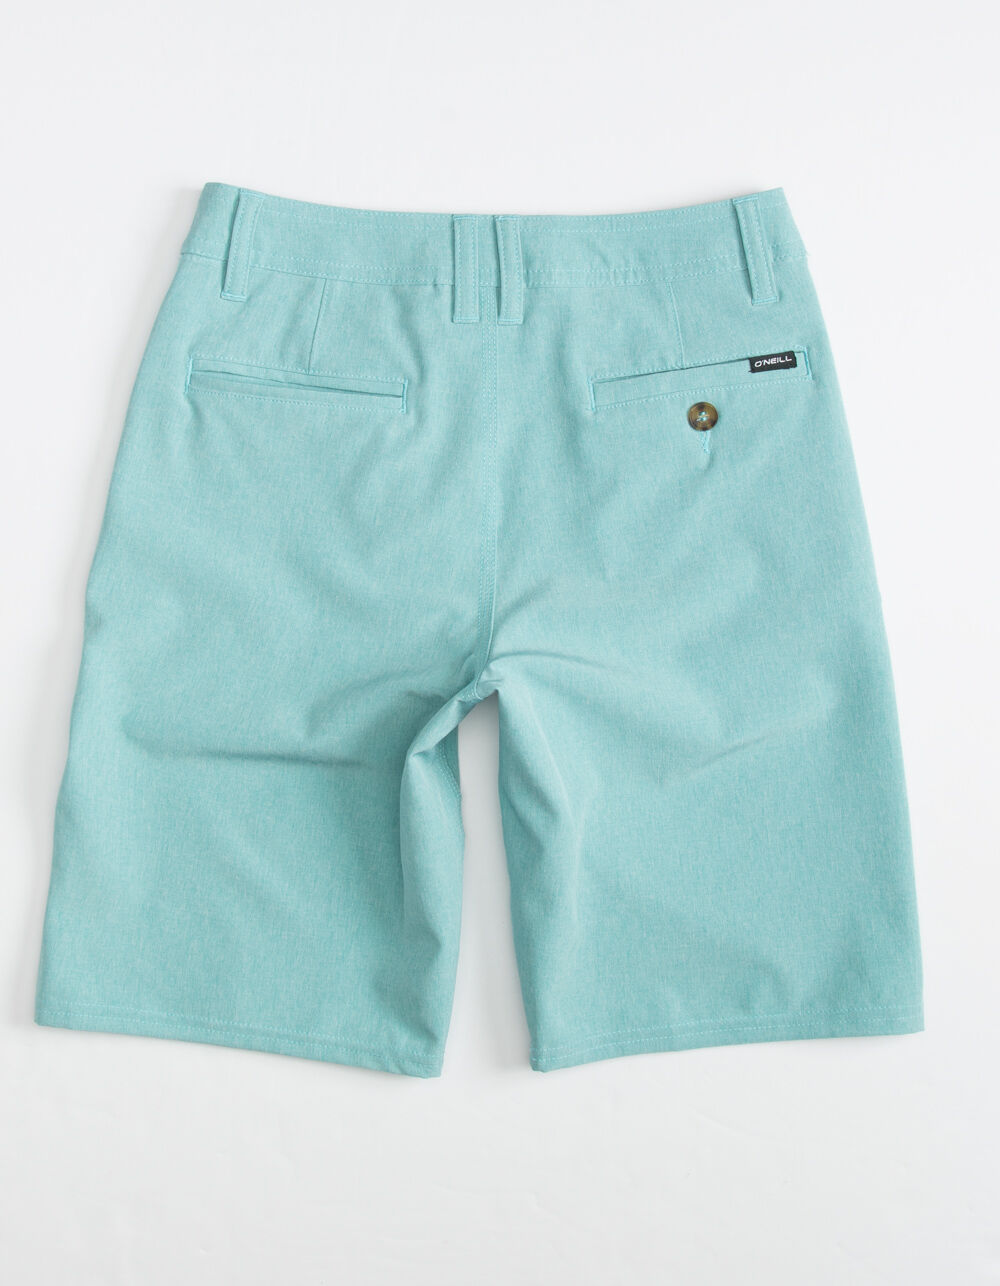 O'NEILL Reserve Heather Boys Turquoise Hybrid Shorts - TURQUOISE | Tillys